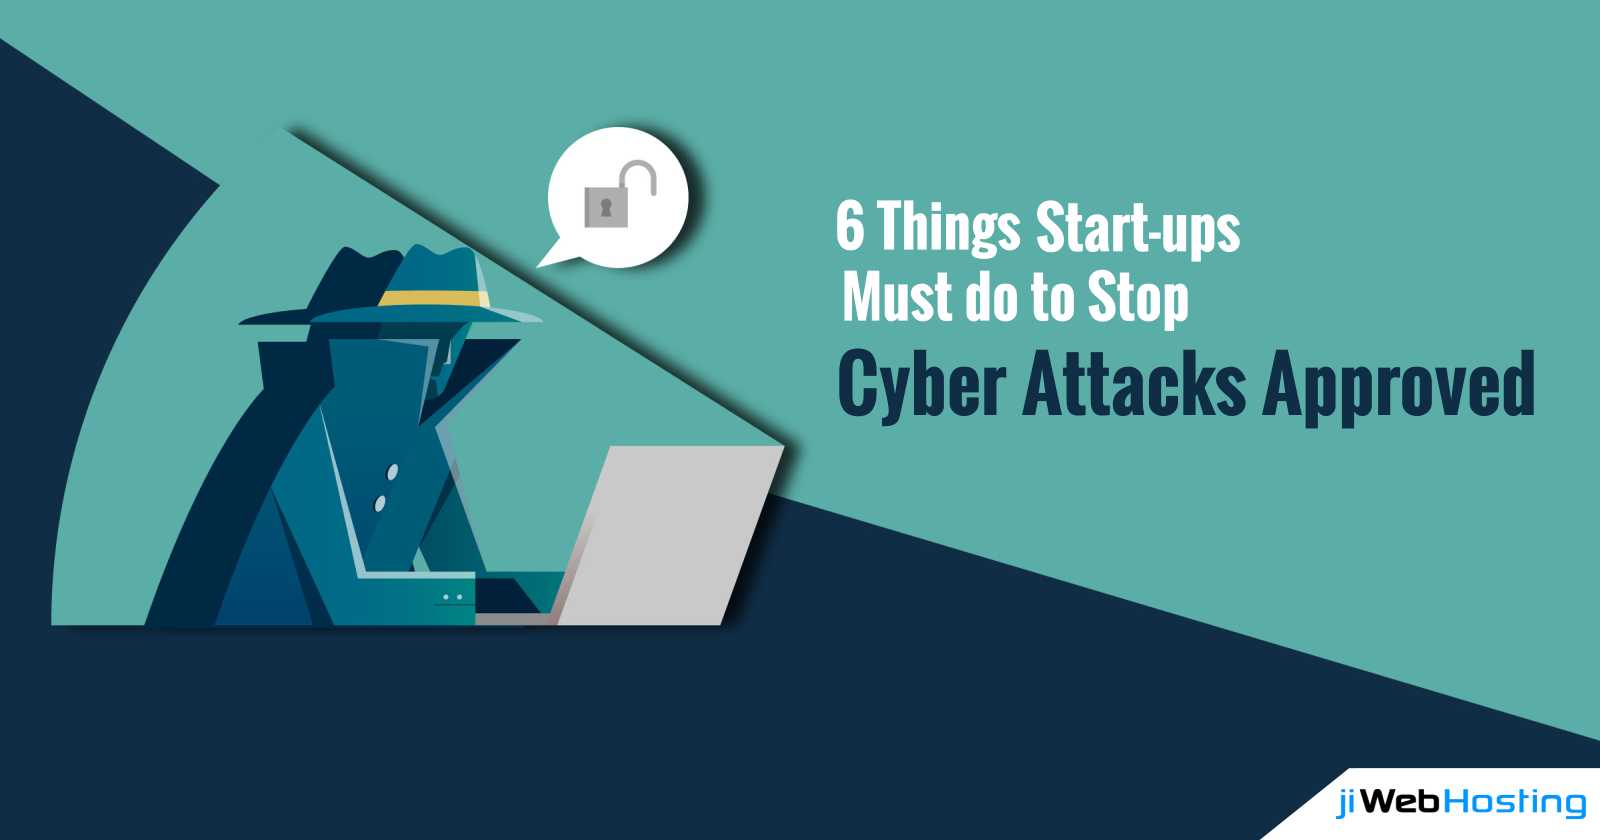 6 Things Start-ups Must do to Stop Cyber Attacks